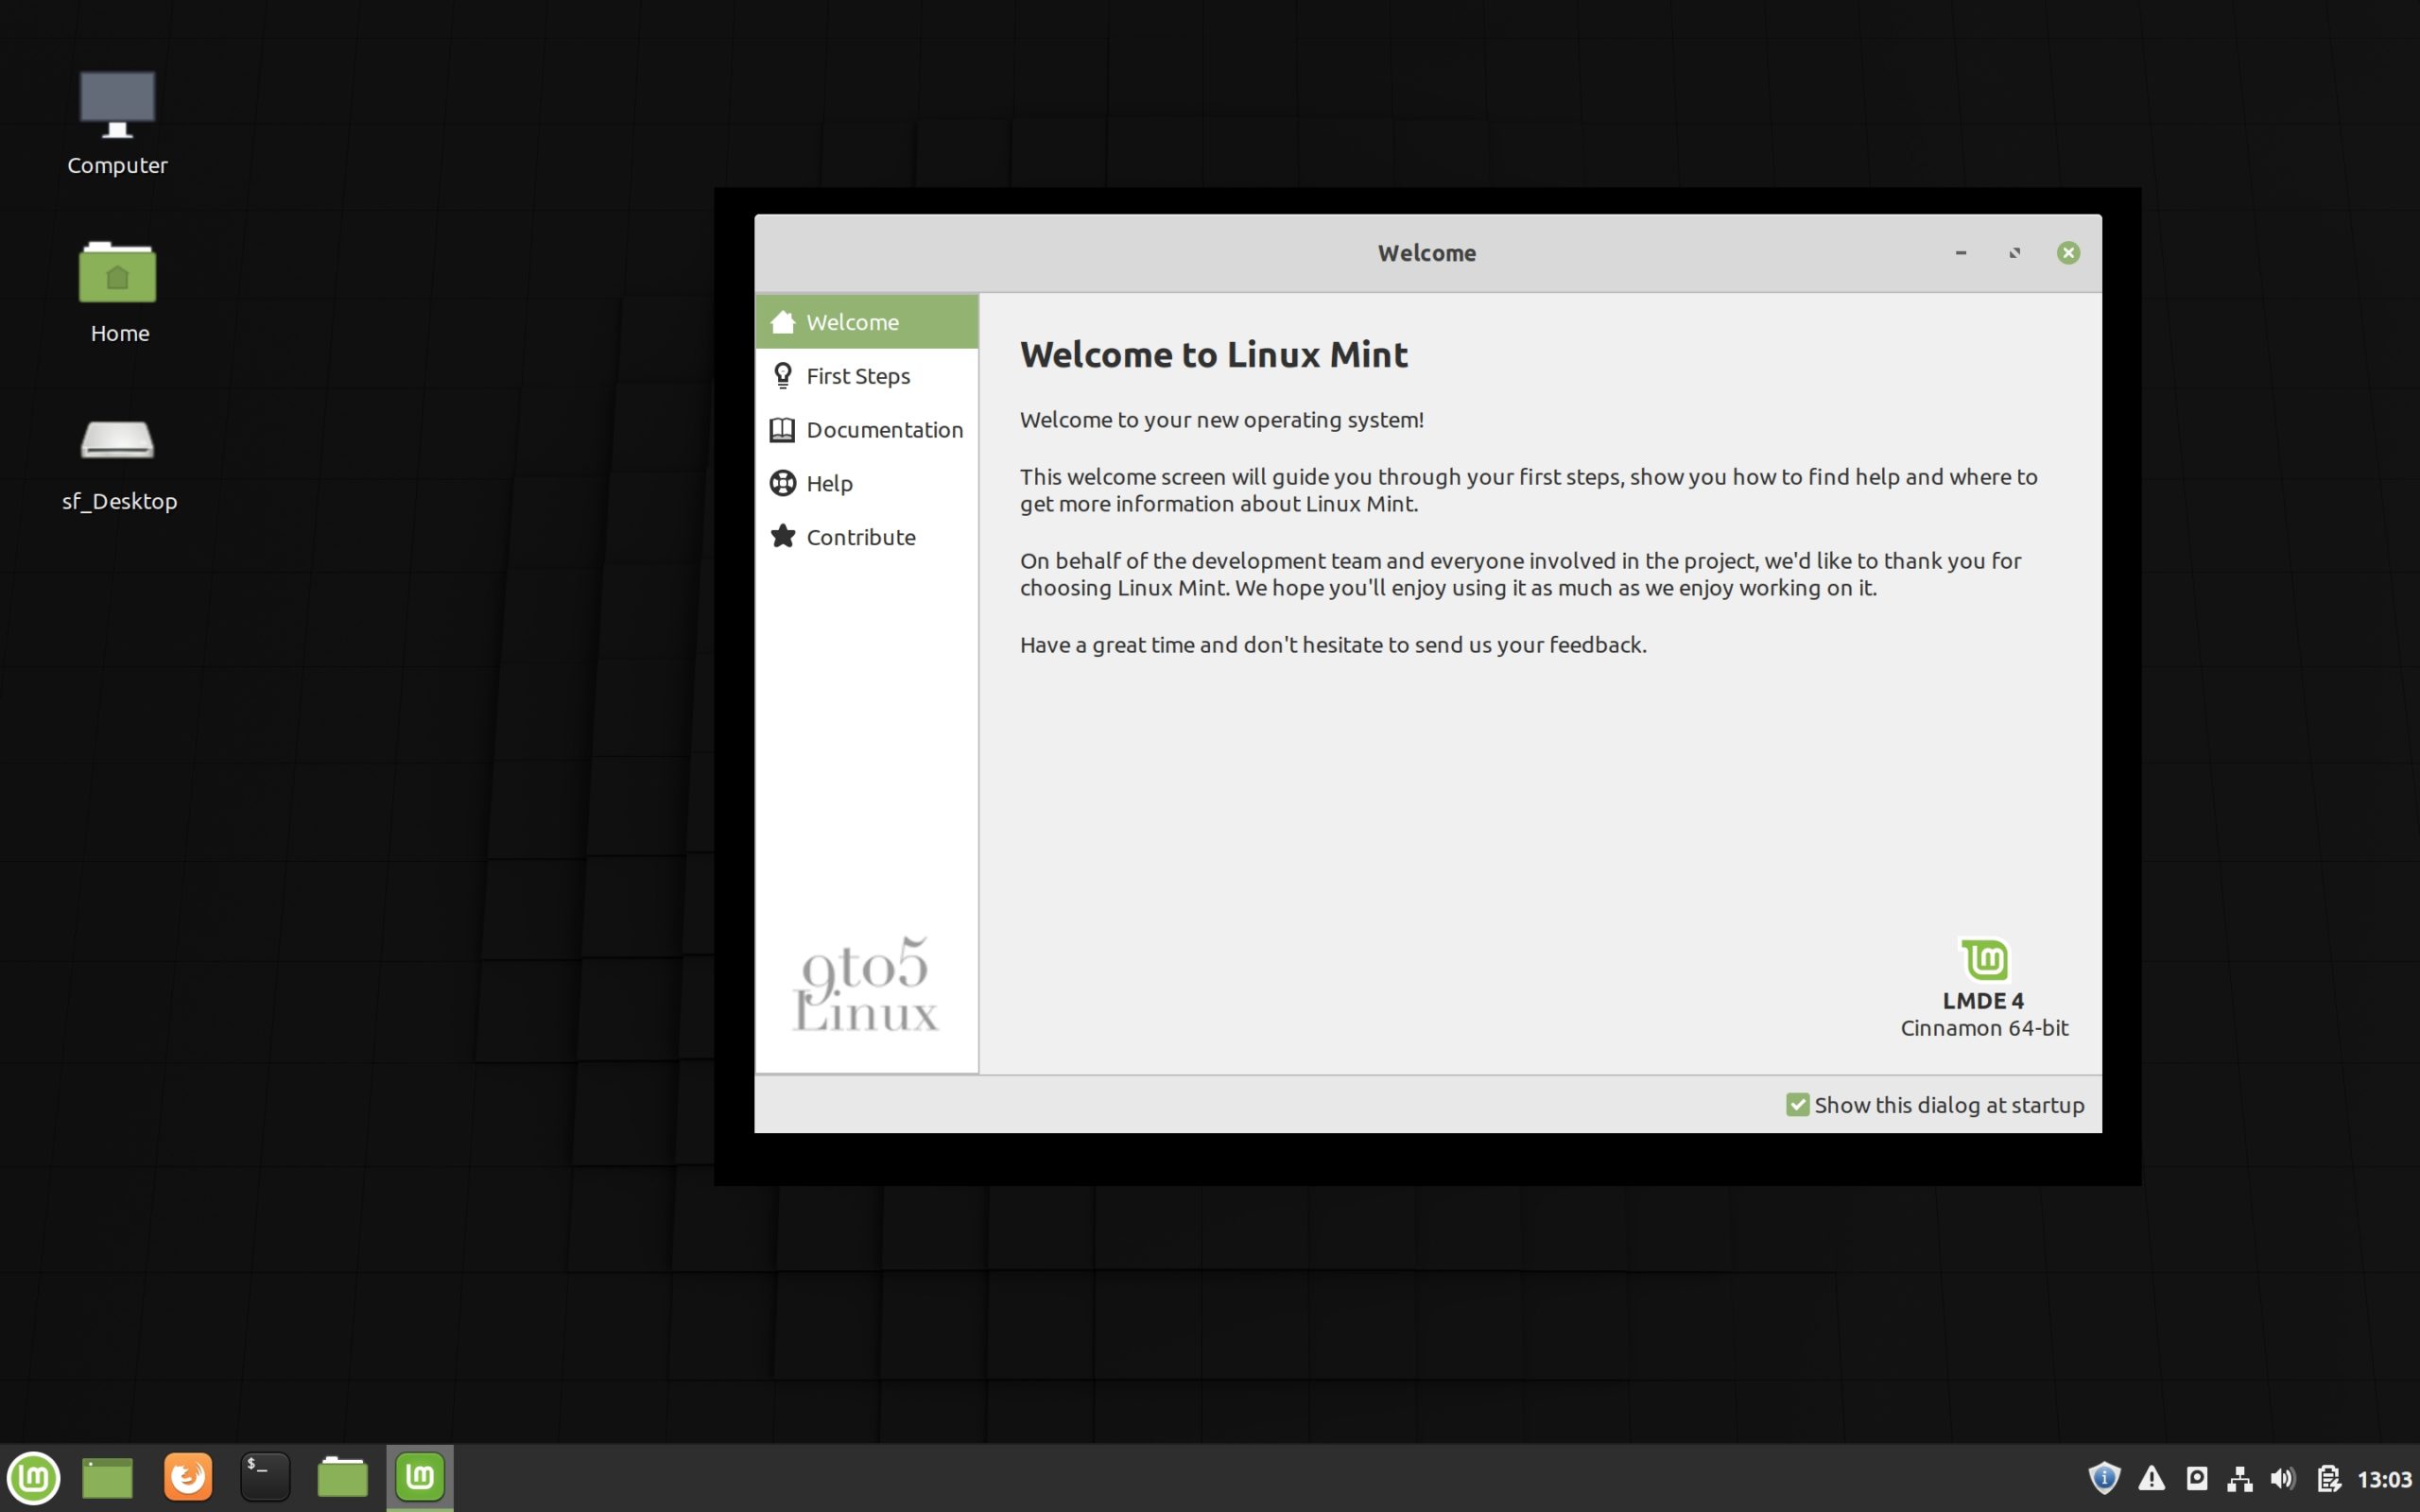 Linux Mint Debian Edition 4 Beta Is Now Available for Download